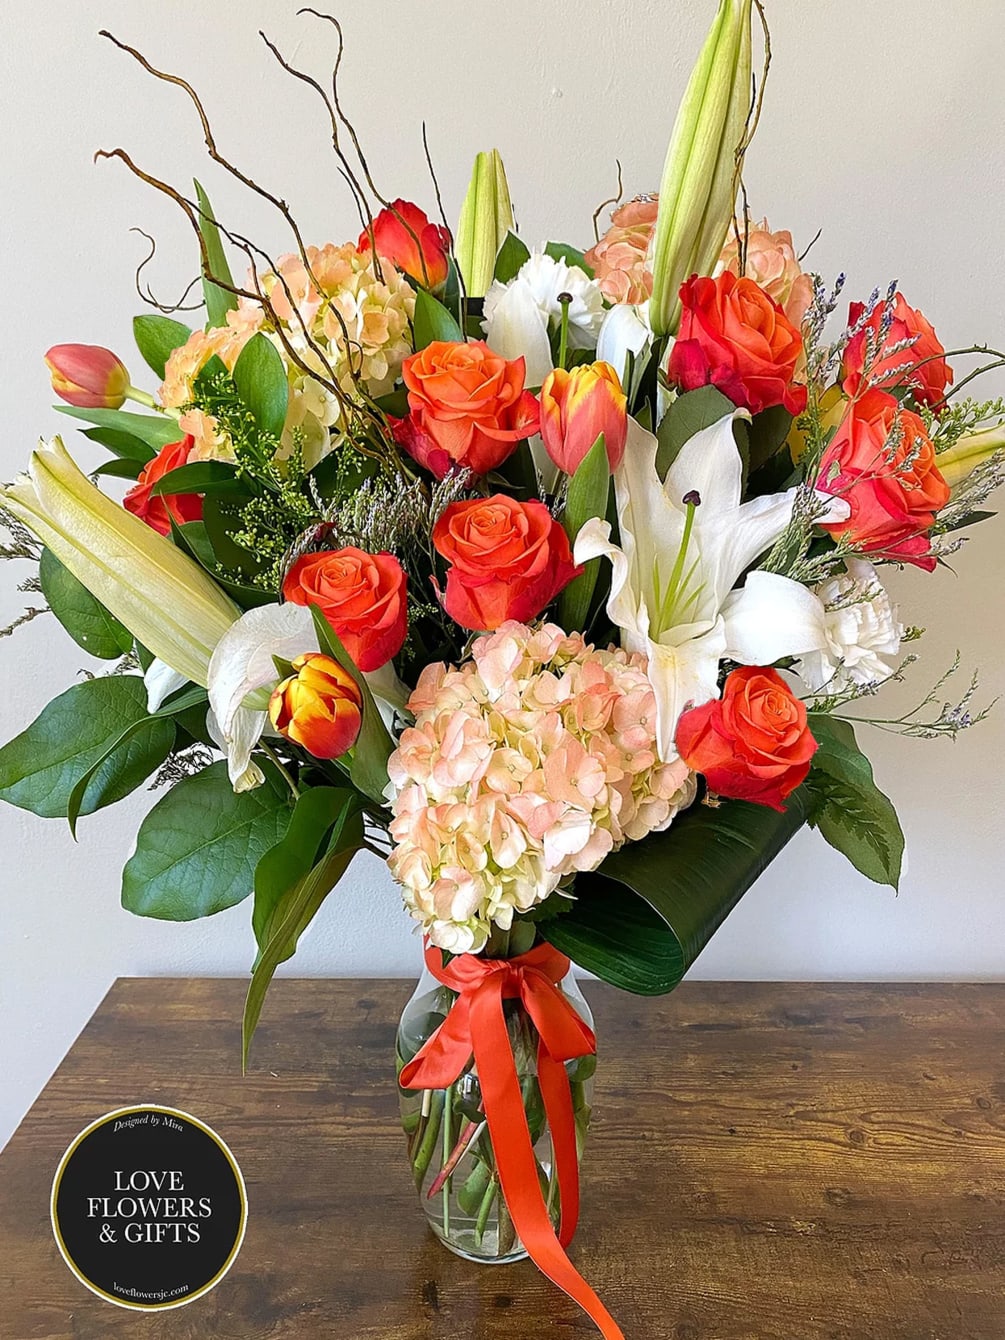 A beautiful, lush burst of vivid oranges&nbsp;and&nbsp;whites designed in a high-quality tall